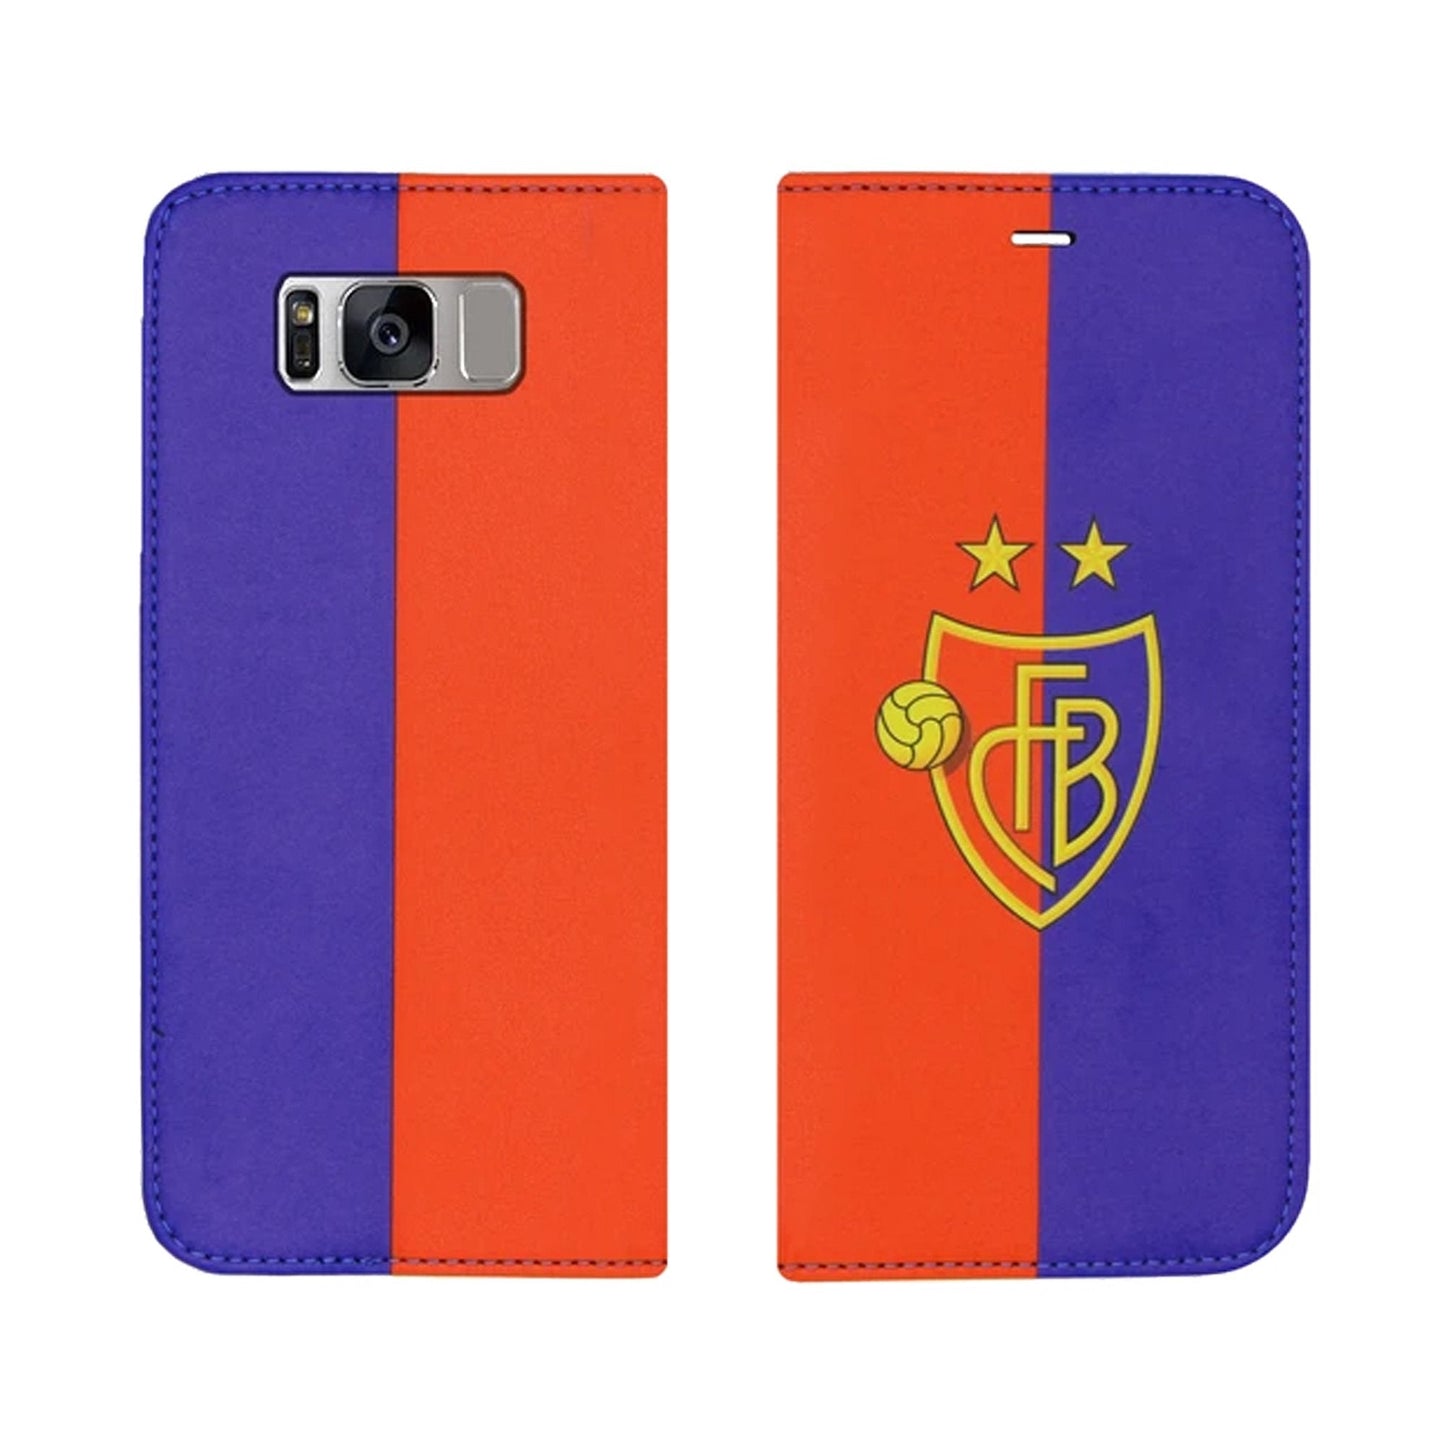 FCB Red / Blue Panorama Case for iPhone and Samsung